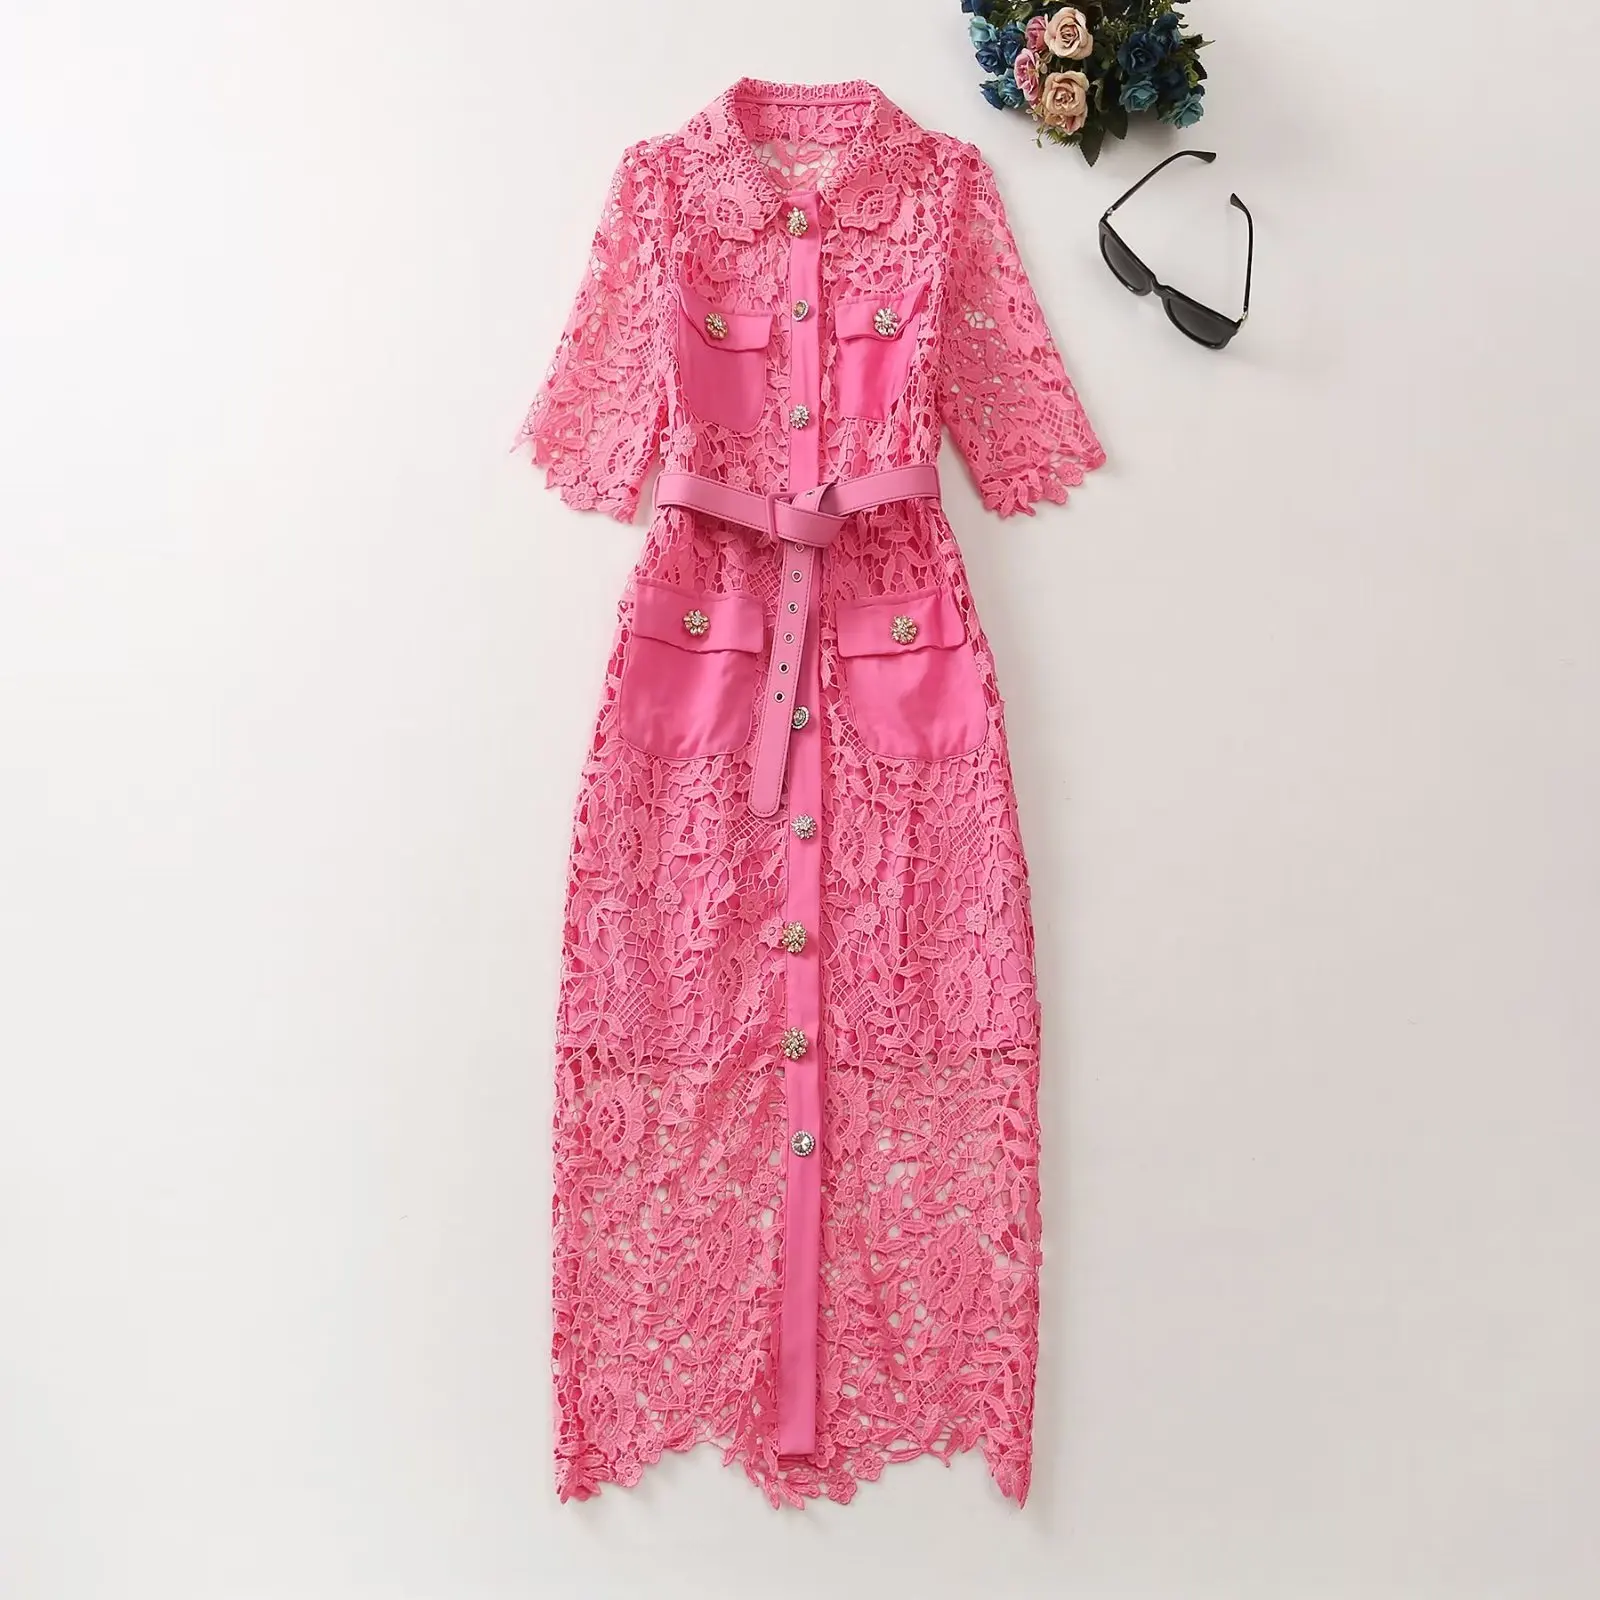 European and American women's clothes 2023 spring new Short sleeve lapel Pink hollowed out lace fashion Belt Dress XXL